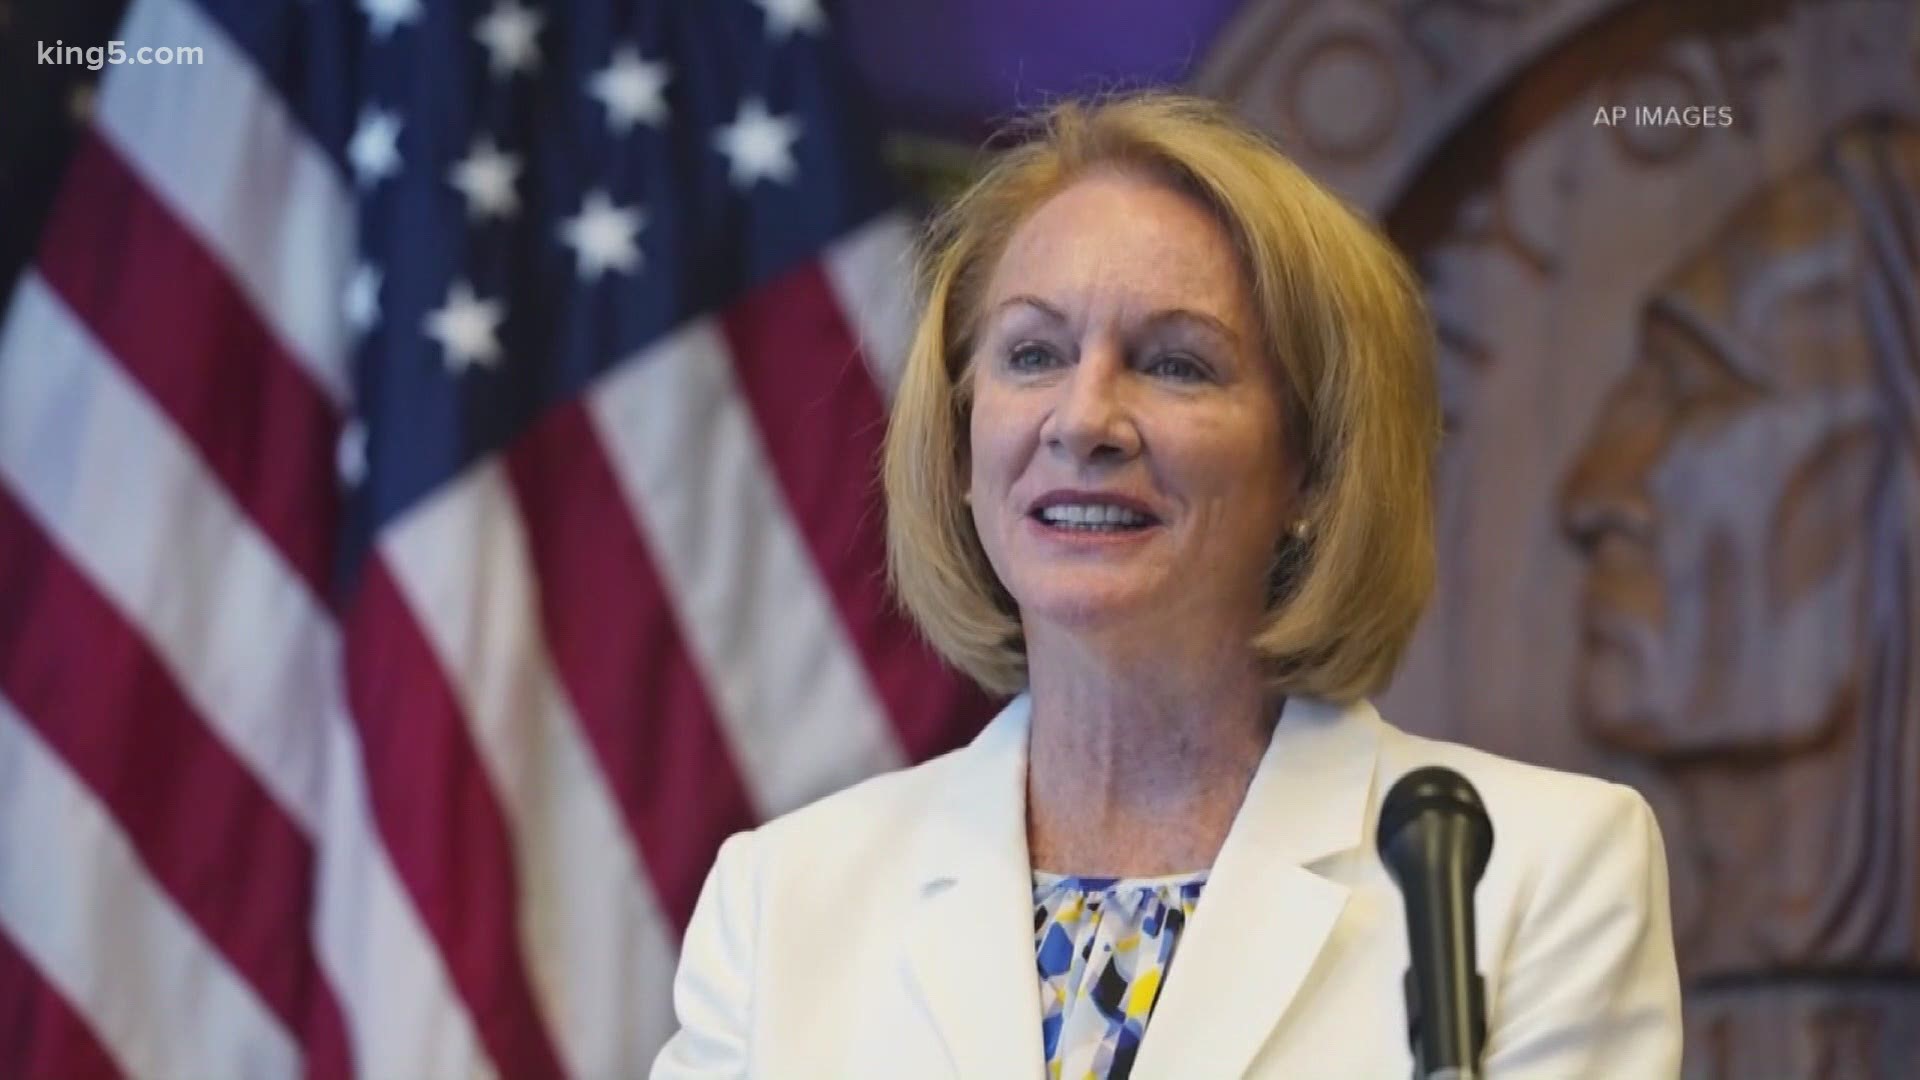 Seattle Mayor Jenny Durkan told KING 5 she will not seek re-election for a second term.